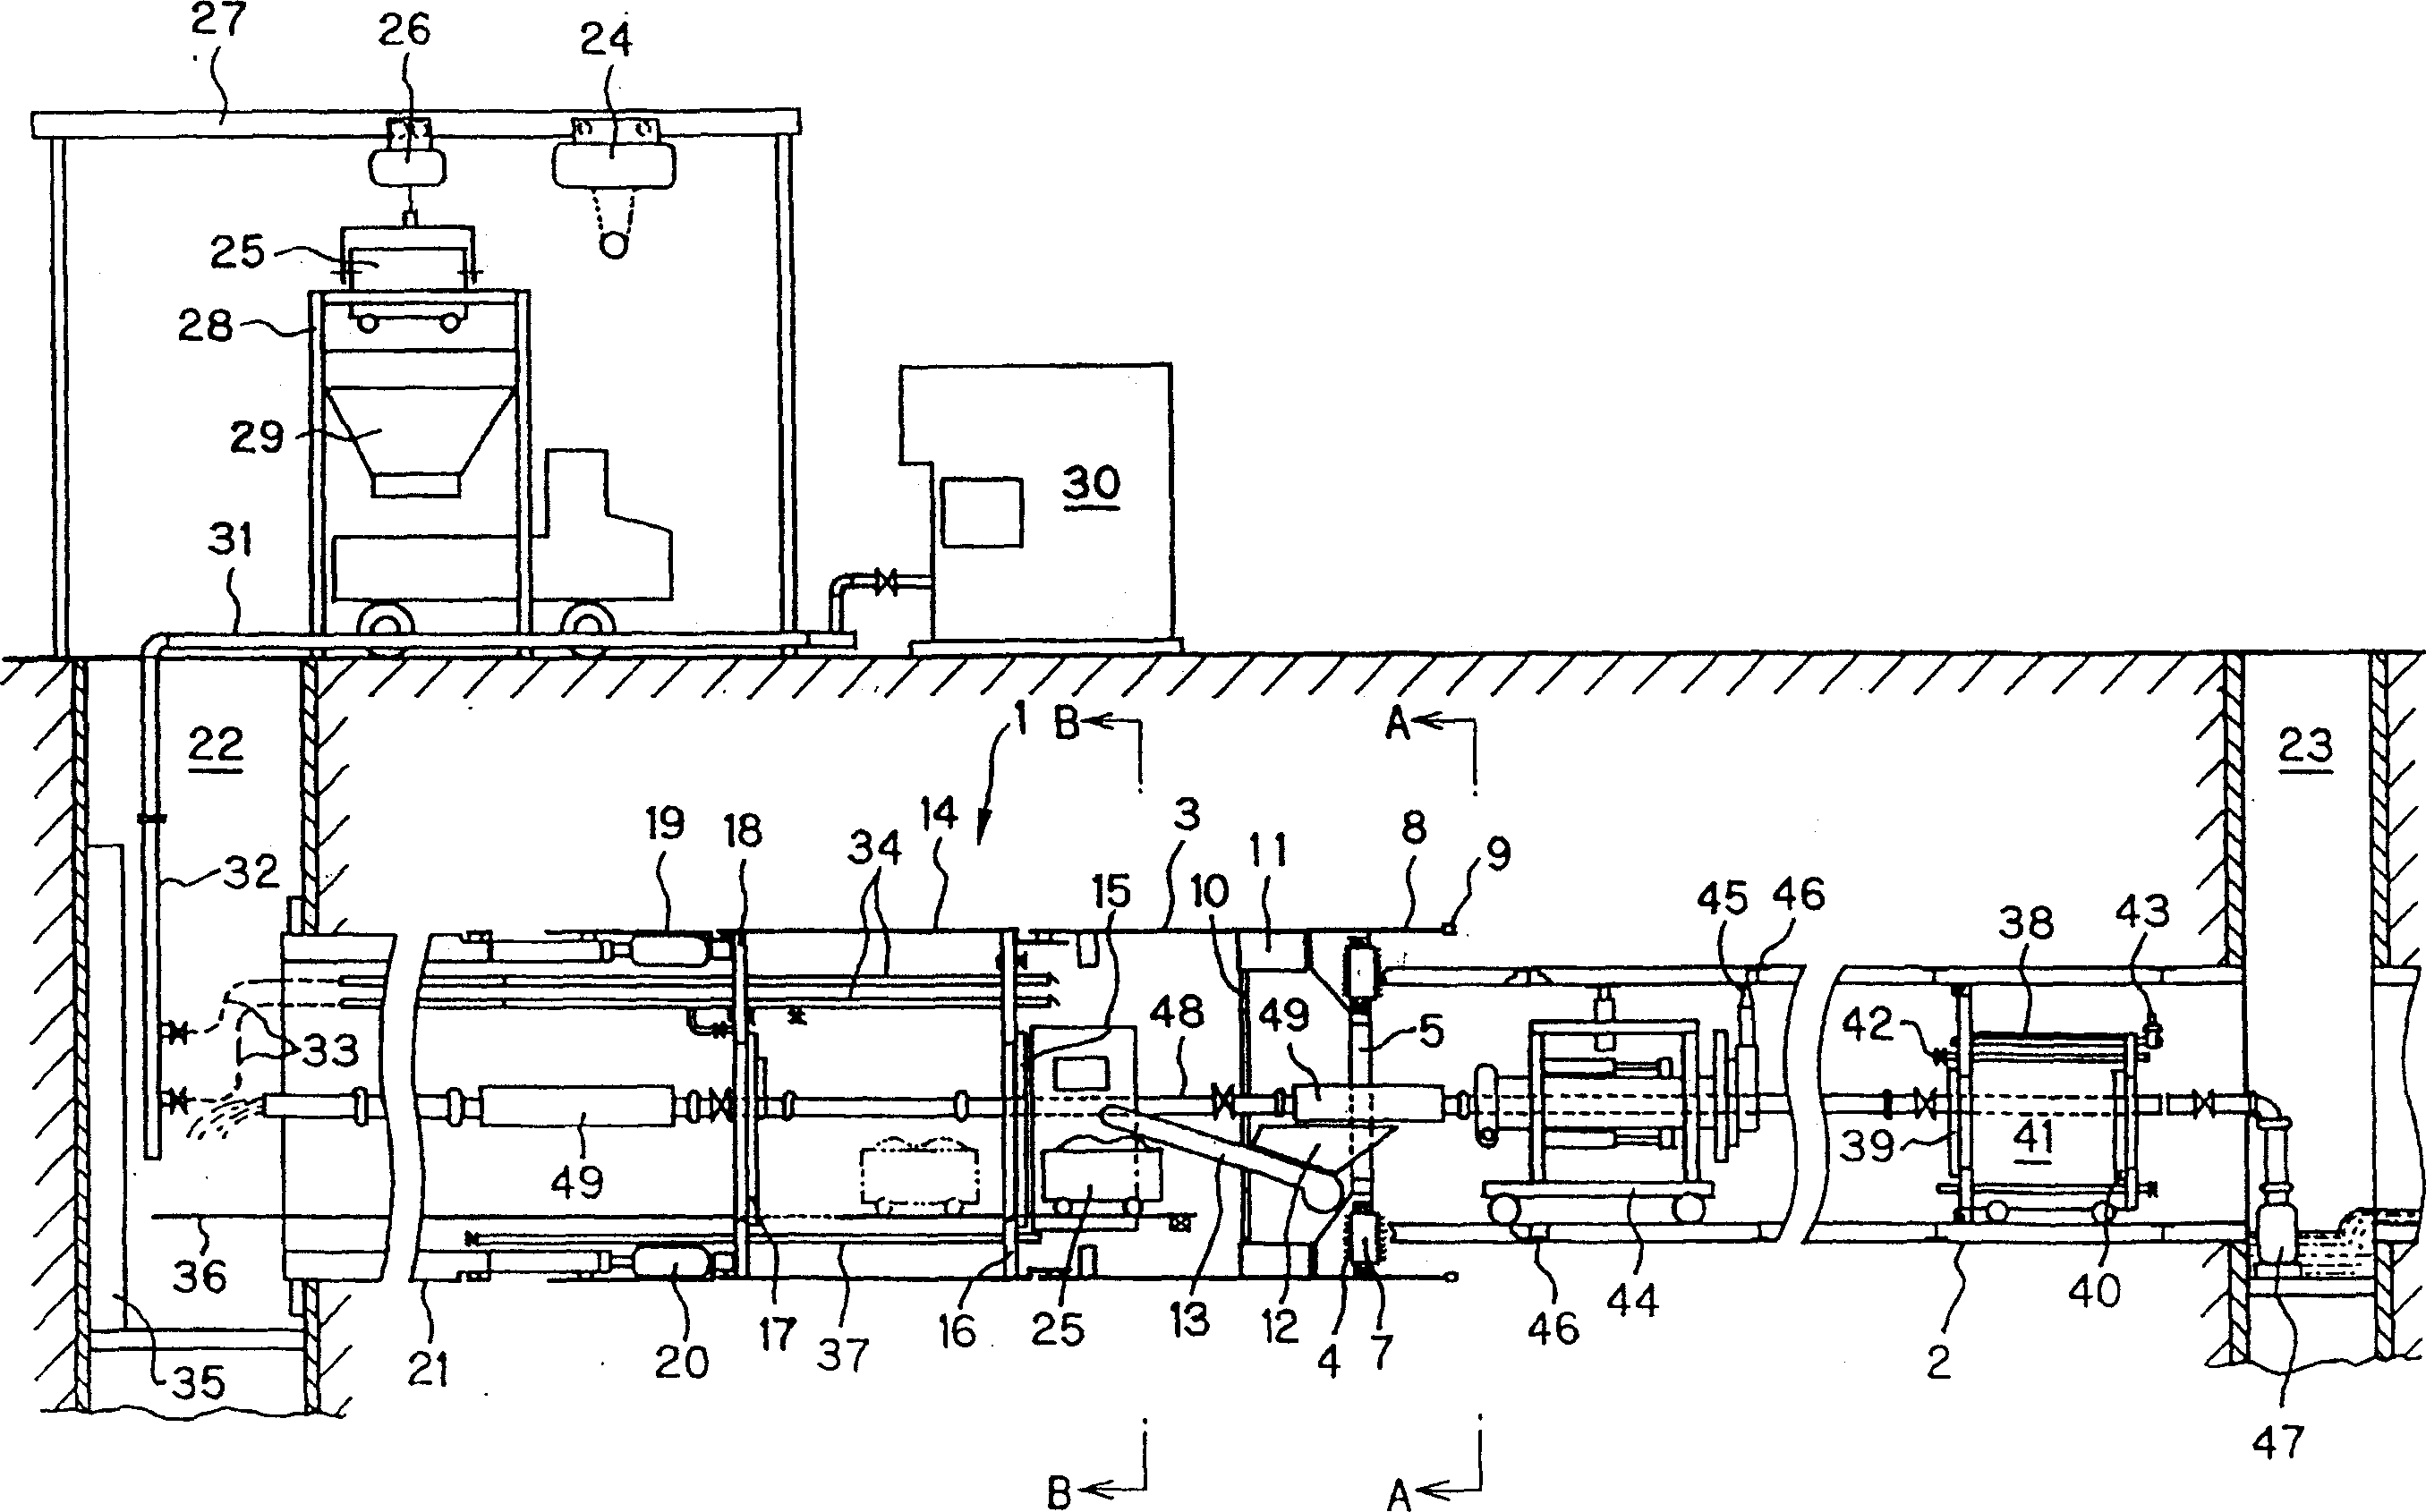 Pneumatic development machine for replacement of existing concrete conduit and replacing method therefor